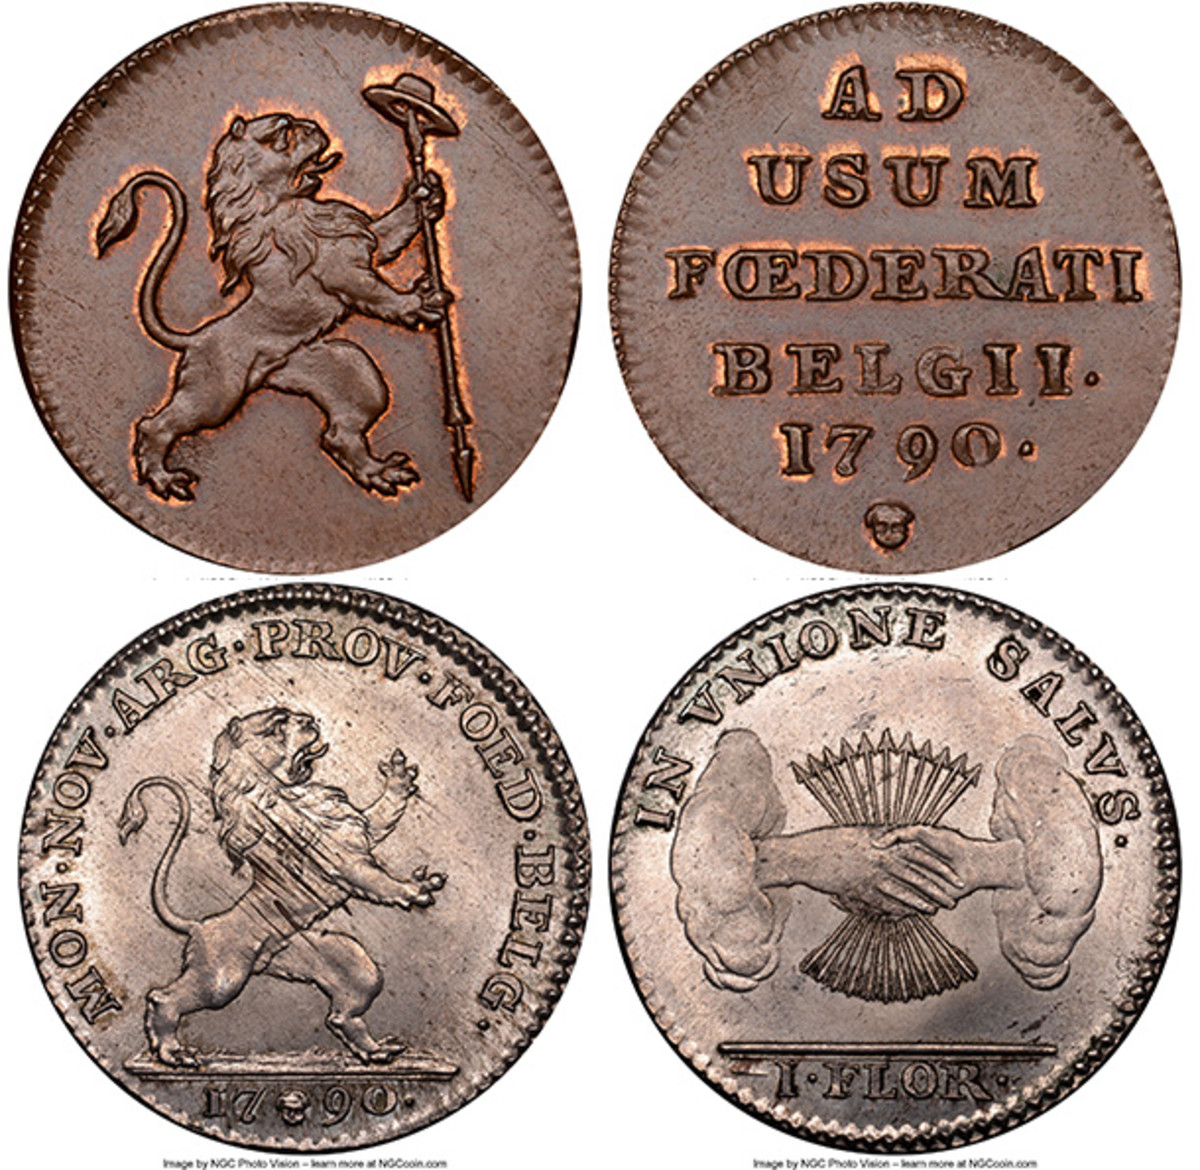 While there are plenty of Netherlands based coins in the Kansas Collection, as well as many coins of Belgium, these two handsome pieces present a melding of the two. Begun as the Austrian Netherlands in 1713, the territory from which these coins arose passed from Spain to Austria to France to the Kingdom of the Netherlands during the 18th and 19th centuries before becoming Belgium in 1830. The Brabant Revolution of 1789-1790 against Hapsburg rule produced eight insurrection types, including these two beautiful examples in such remarkable states of preservation.